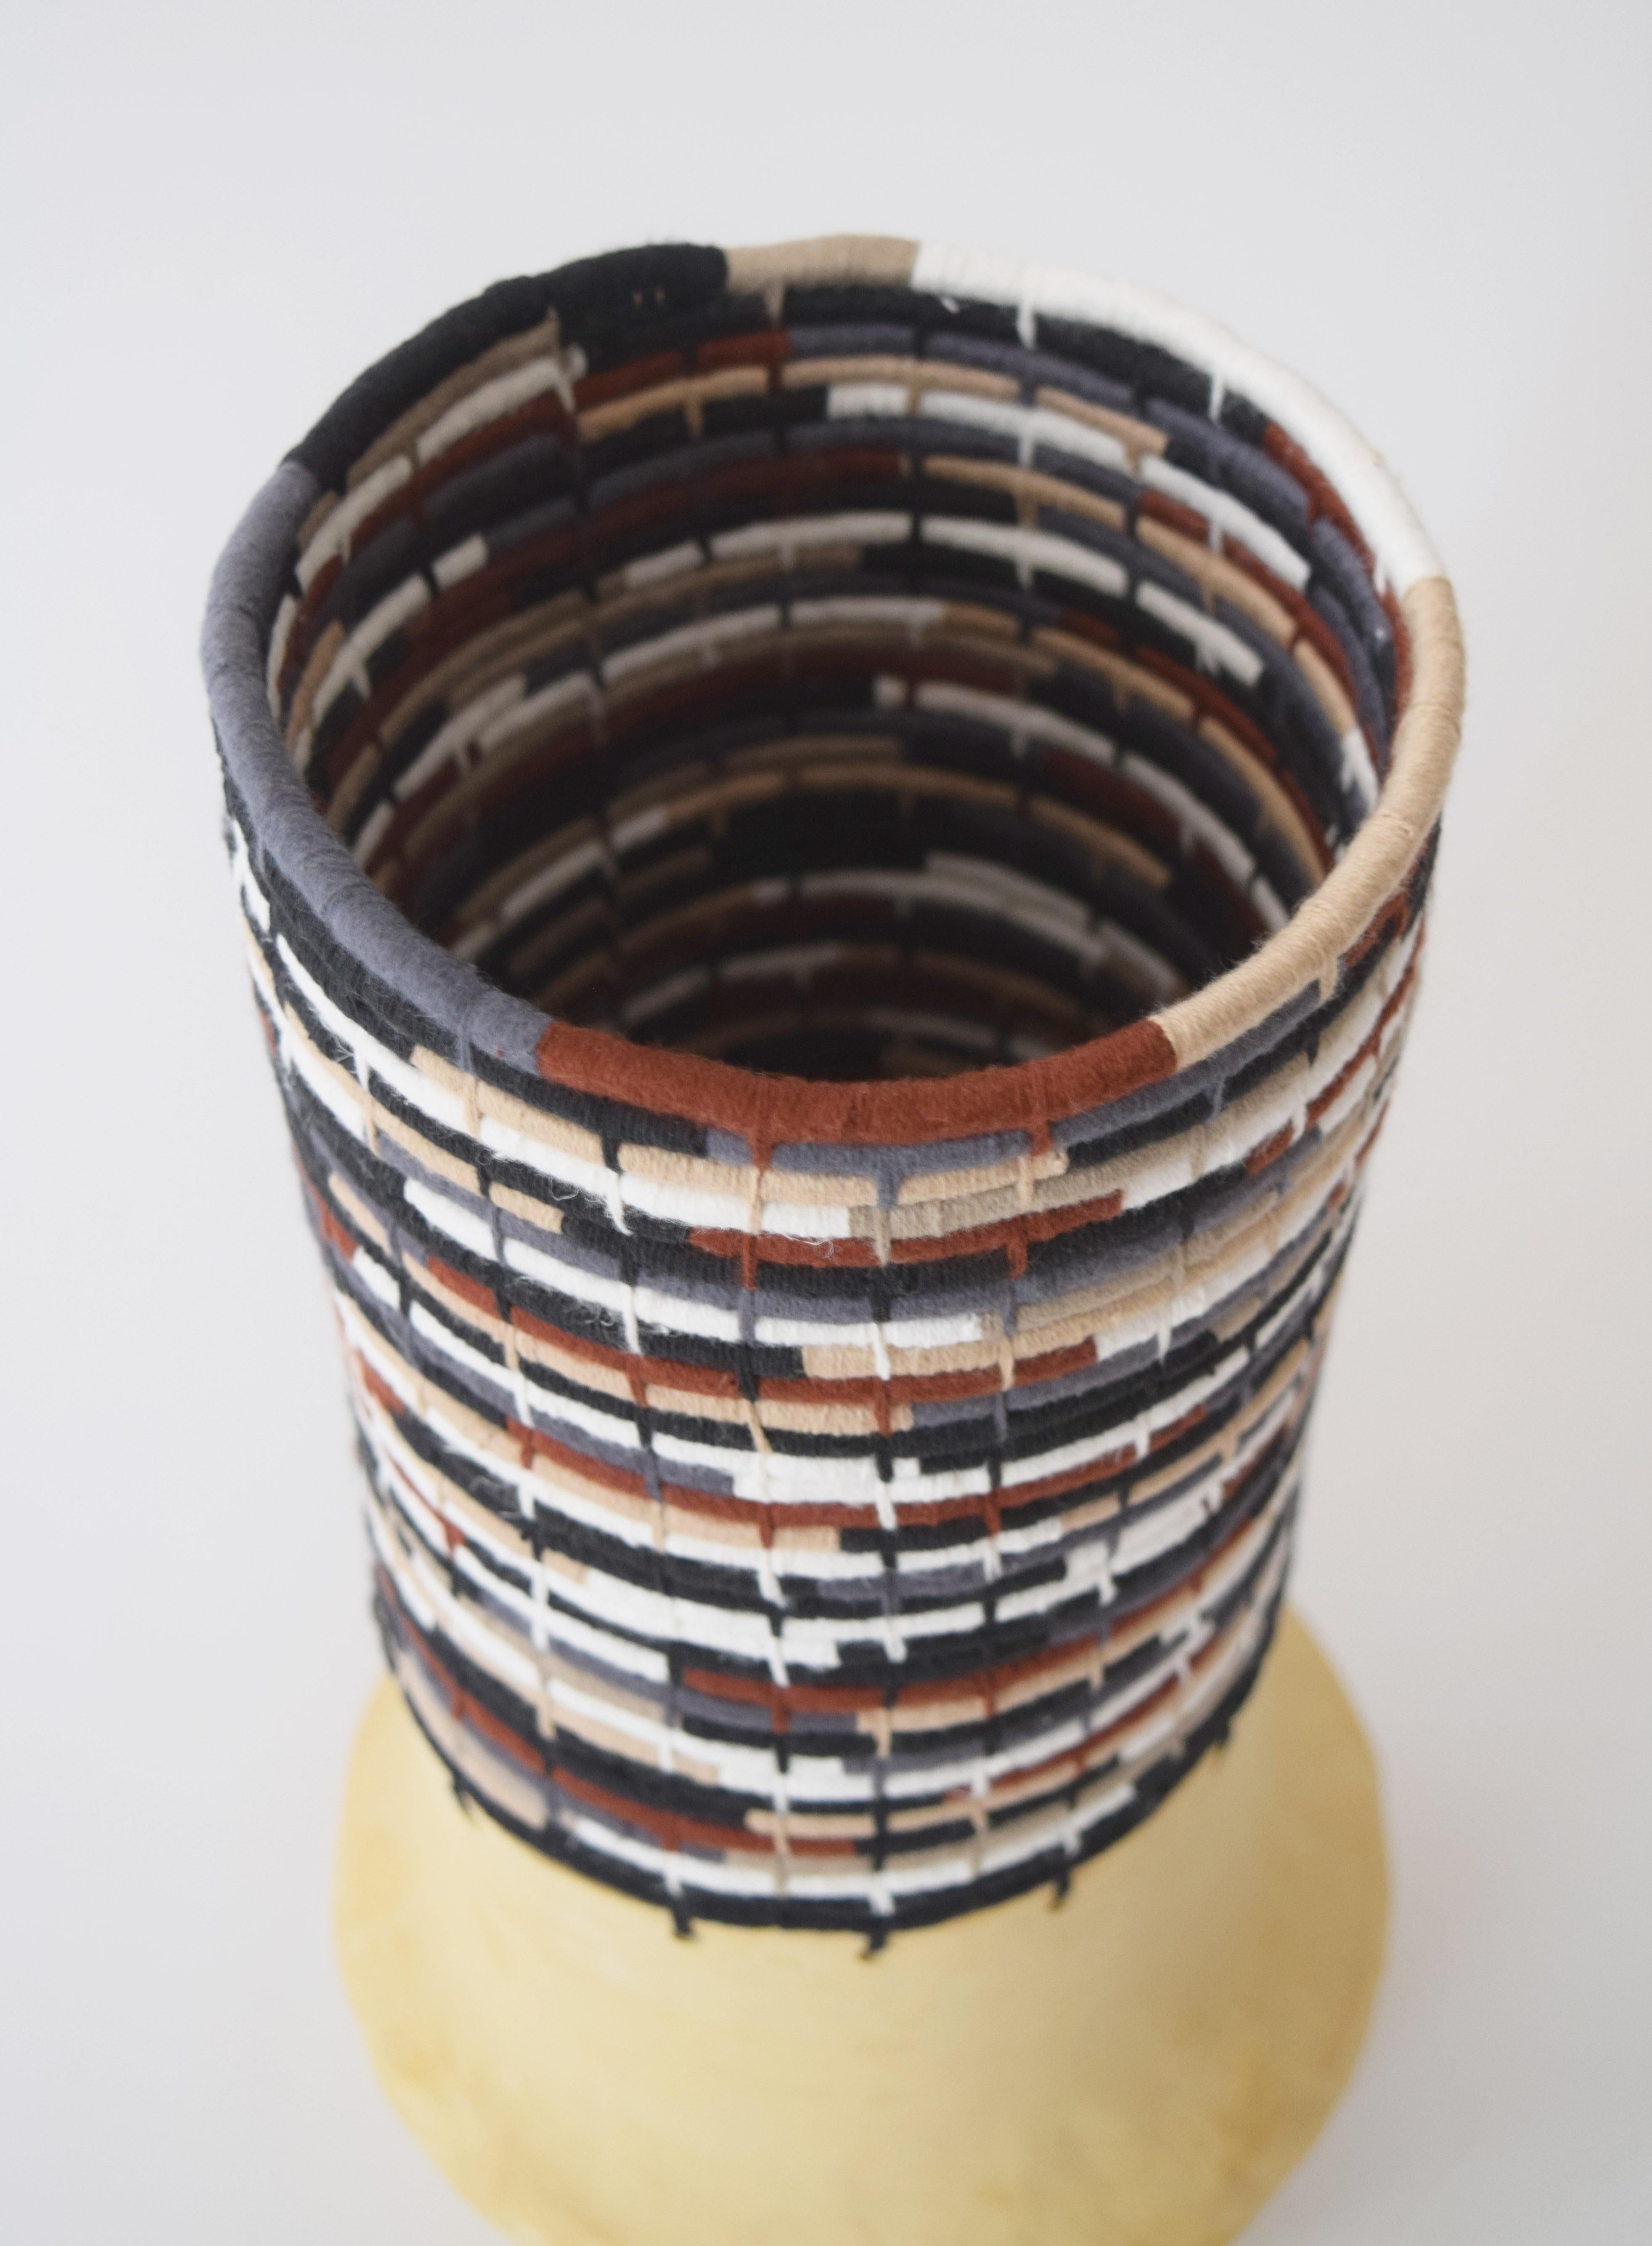 American One of a Kind Ceramic and Woven Cotton Vessel in Multi